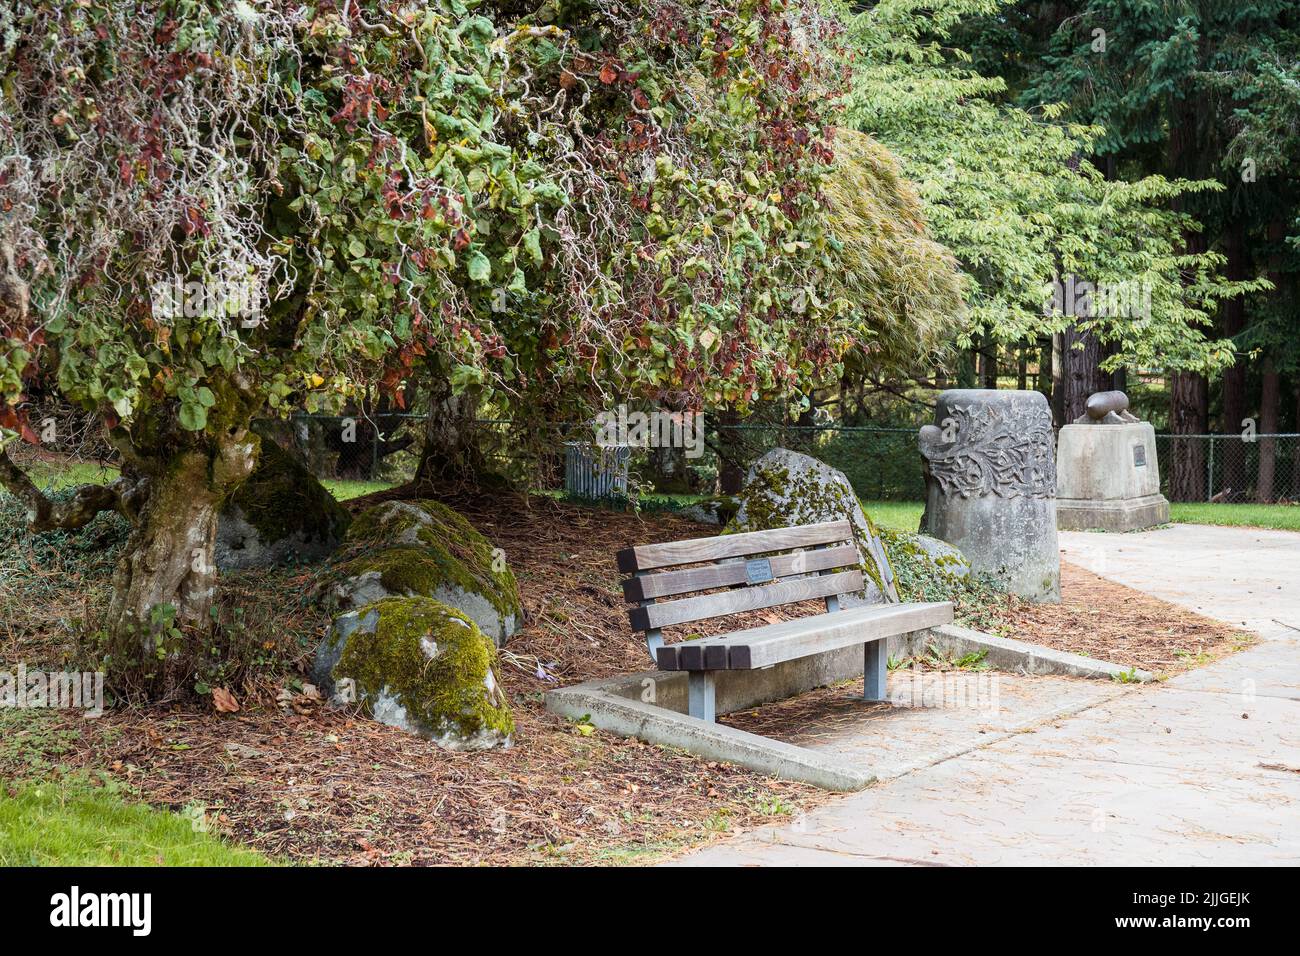 Tree with Curly, Twisty Branches Next to Bench in Japanese Botanical Garden Stock Photo